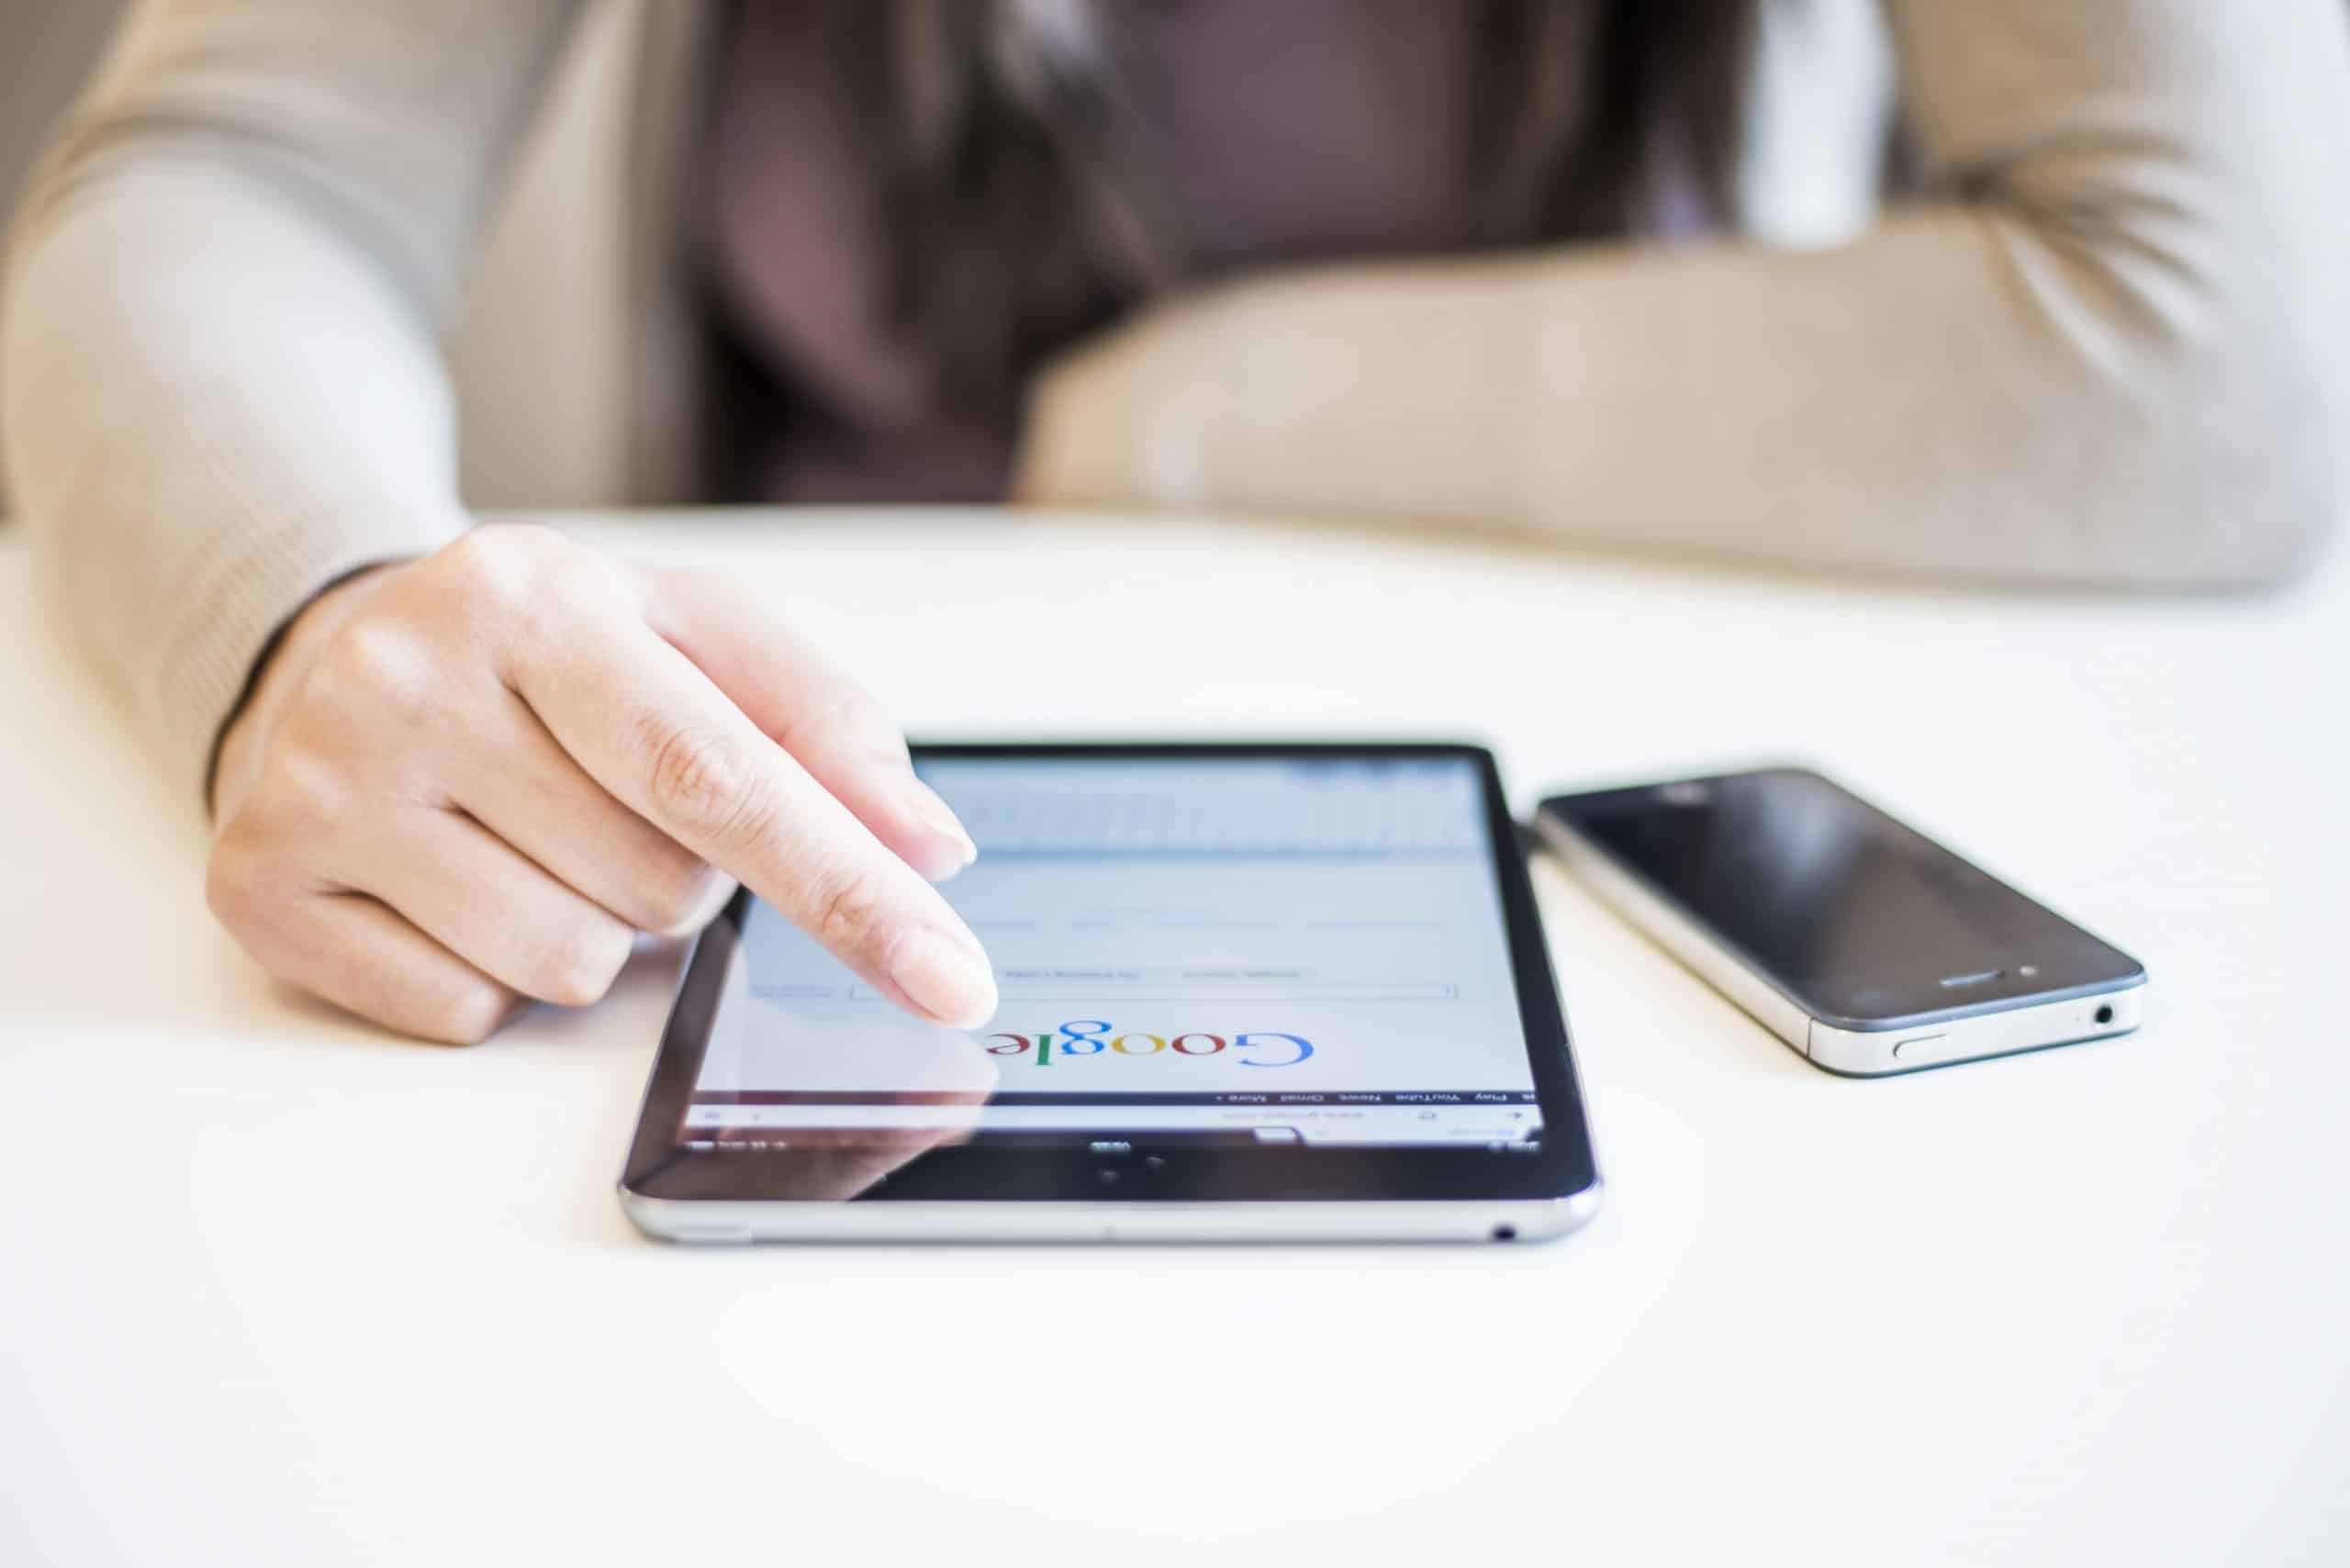 Woman hands holding and touching on Apple iPad mini with Google search web page on a screen.